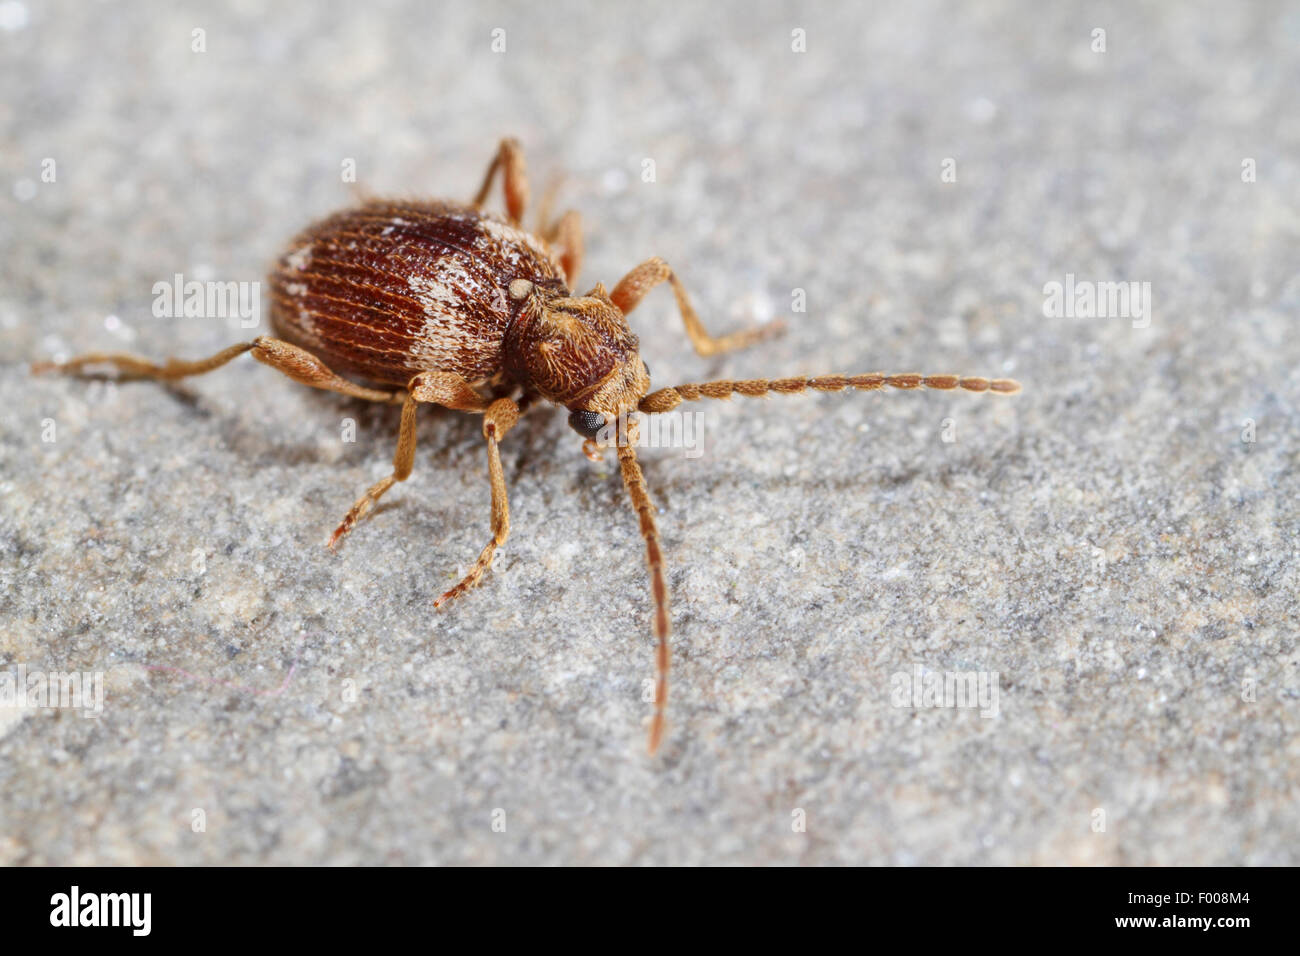 Common spider beetle, White-marked Spider Beetle, Whitemarked Spider Beetle (Ptinus fur), on the ground, Germany Stock Photo